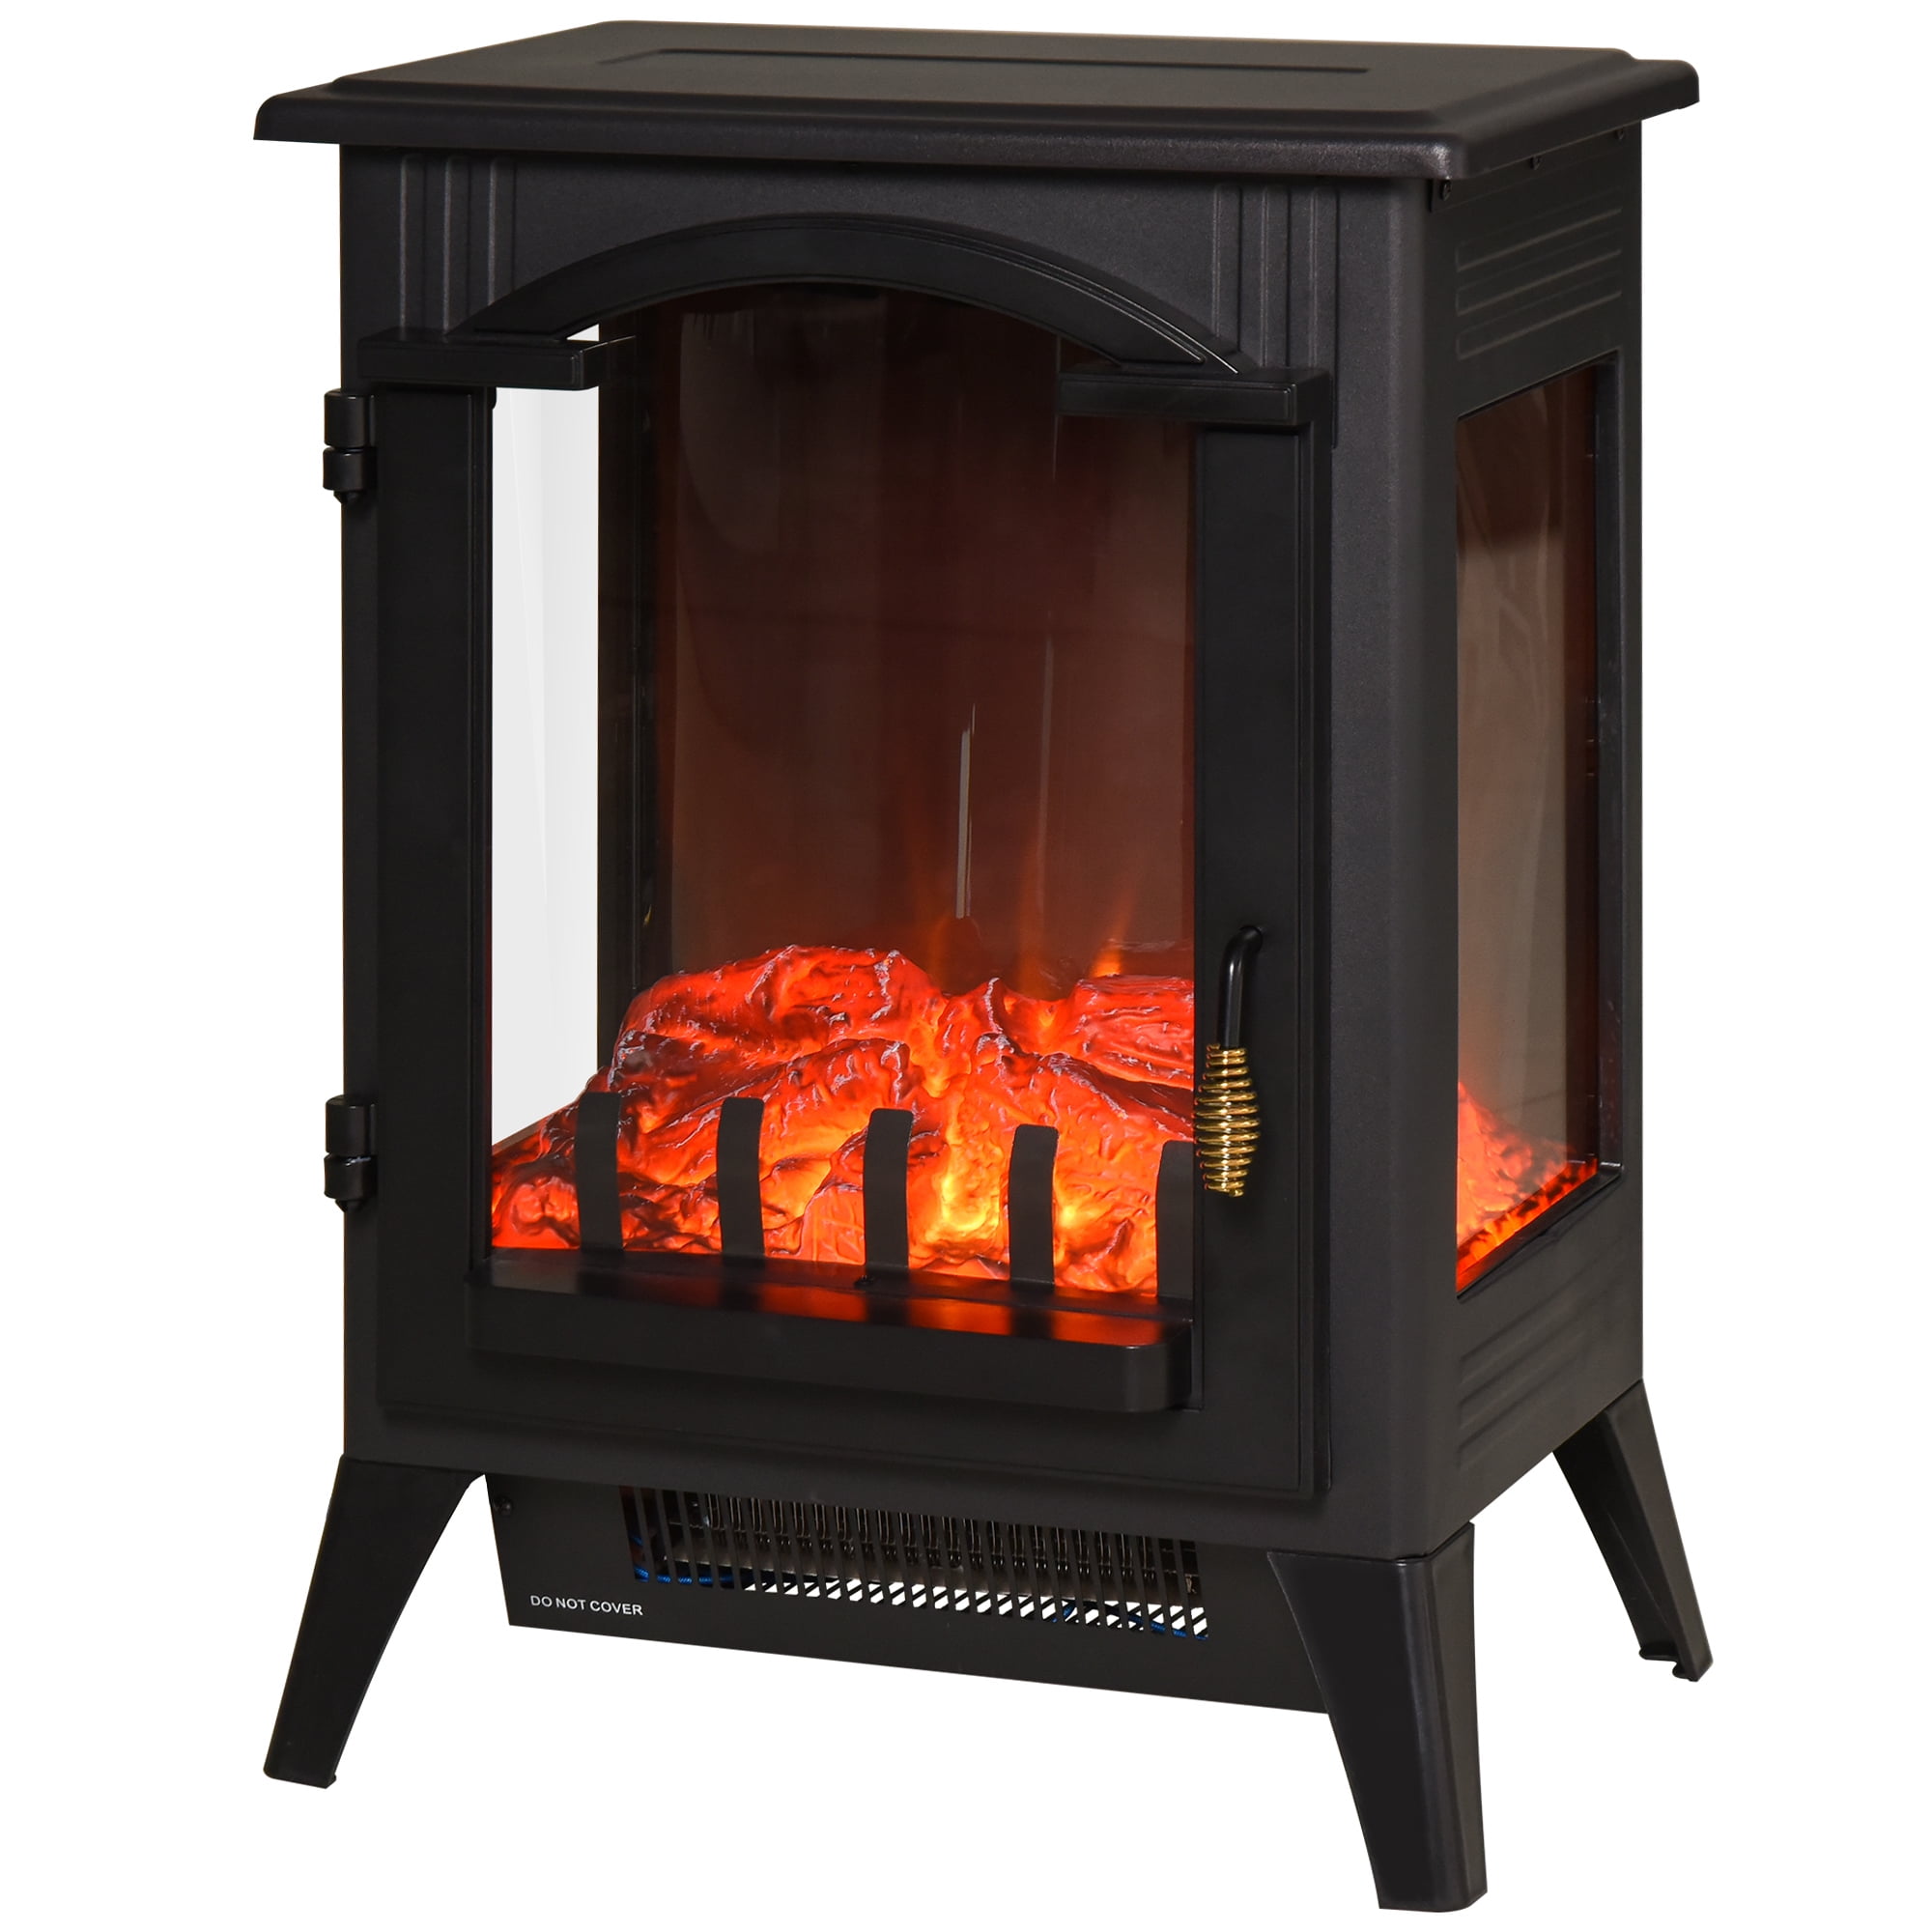 HOMCOM 750/1500W Portable Electric Fireplace Stove Heater Adjustable LED Flames 